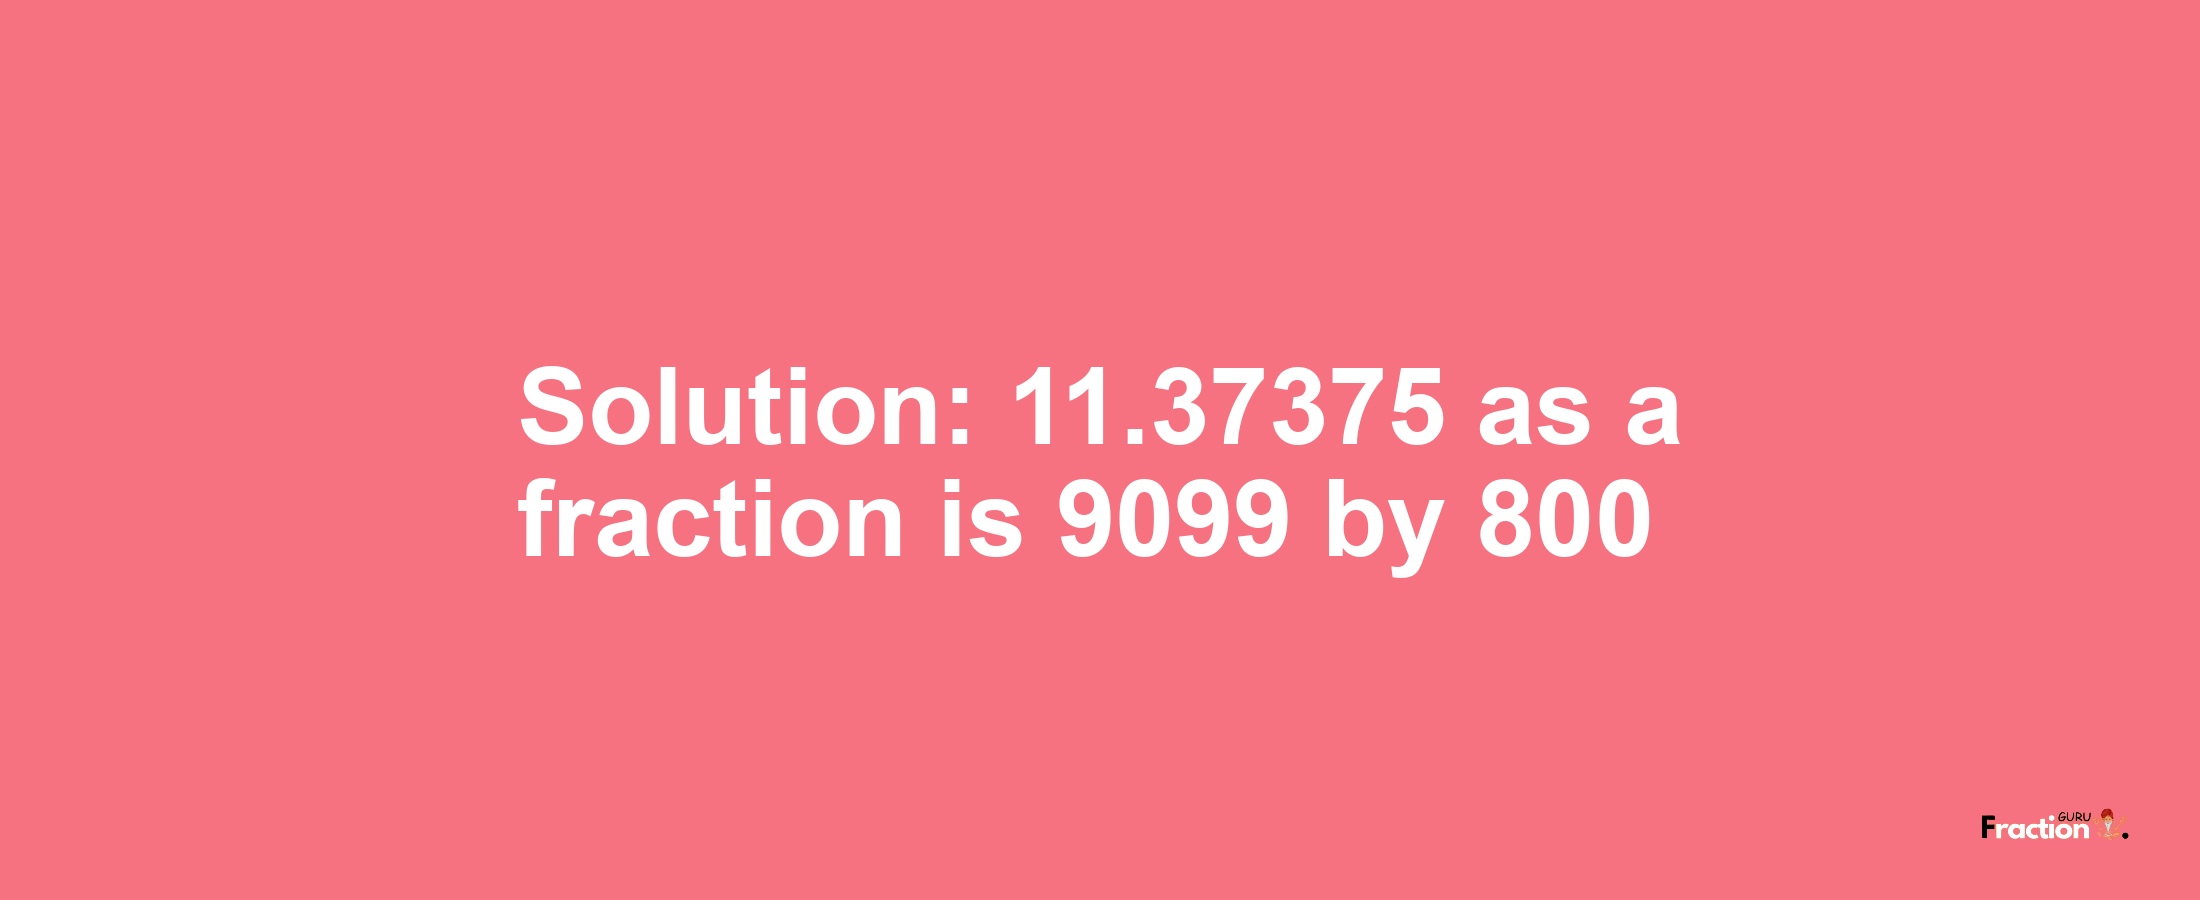 Solution:11.37375 as a fraction is 9099/800